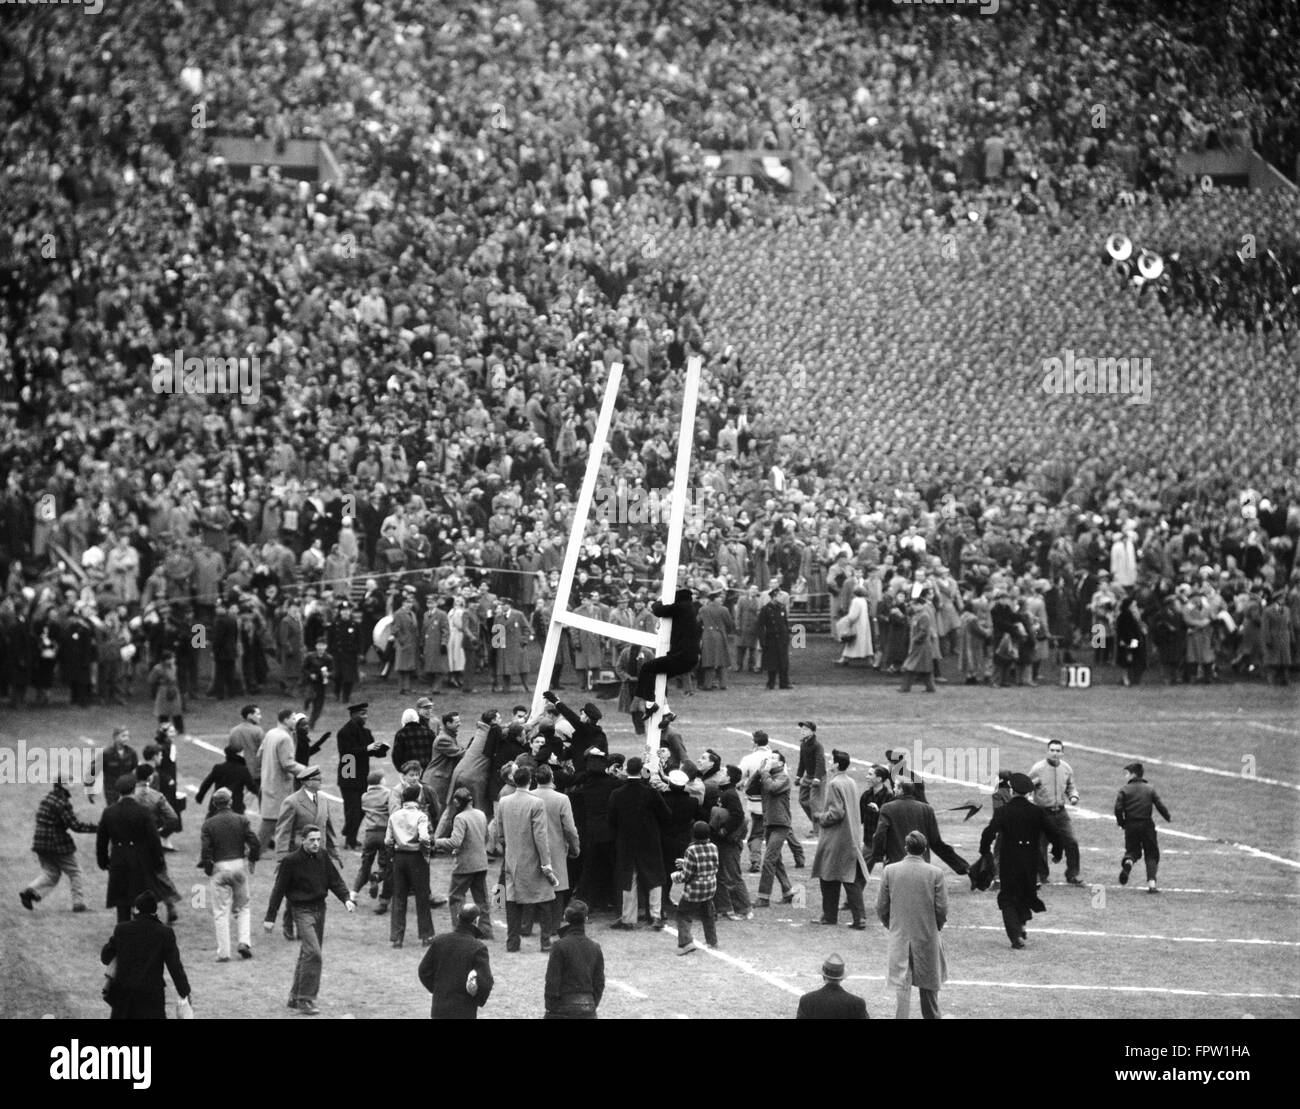 1950s ARMY NAVY GAME EXCITED SPECTATORS CROWD TEARING DOWN GOAL POSTS NAVY WON THE GAME Stock Photo